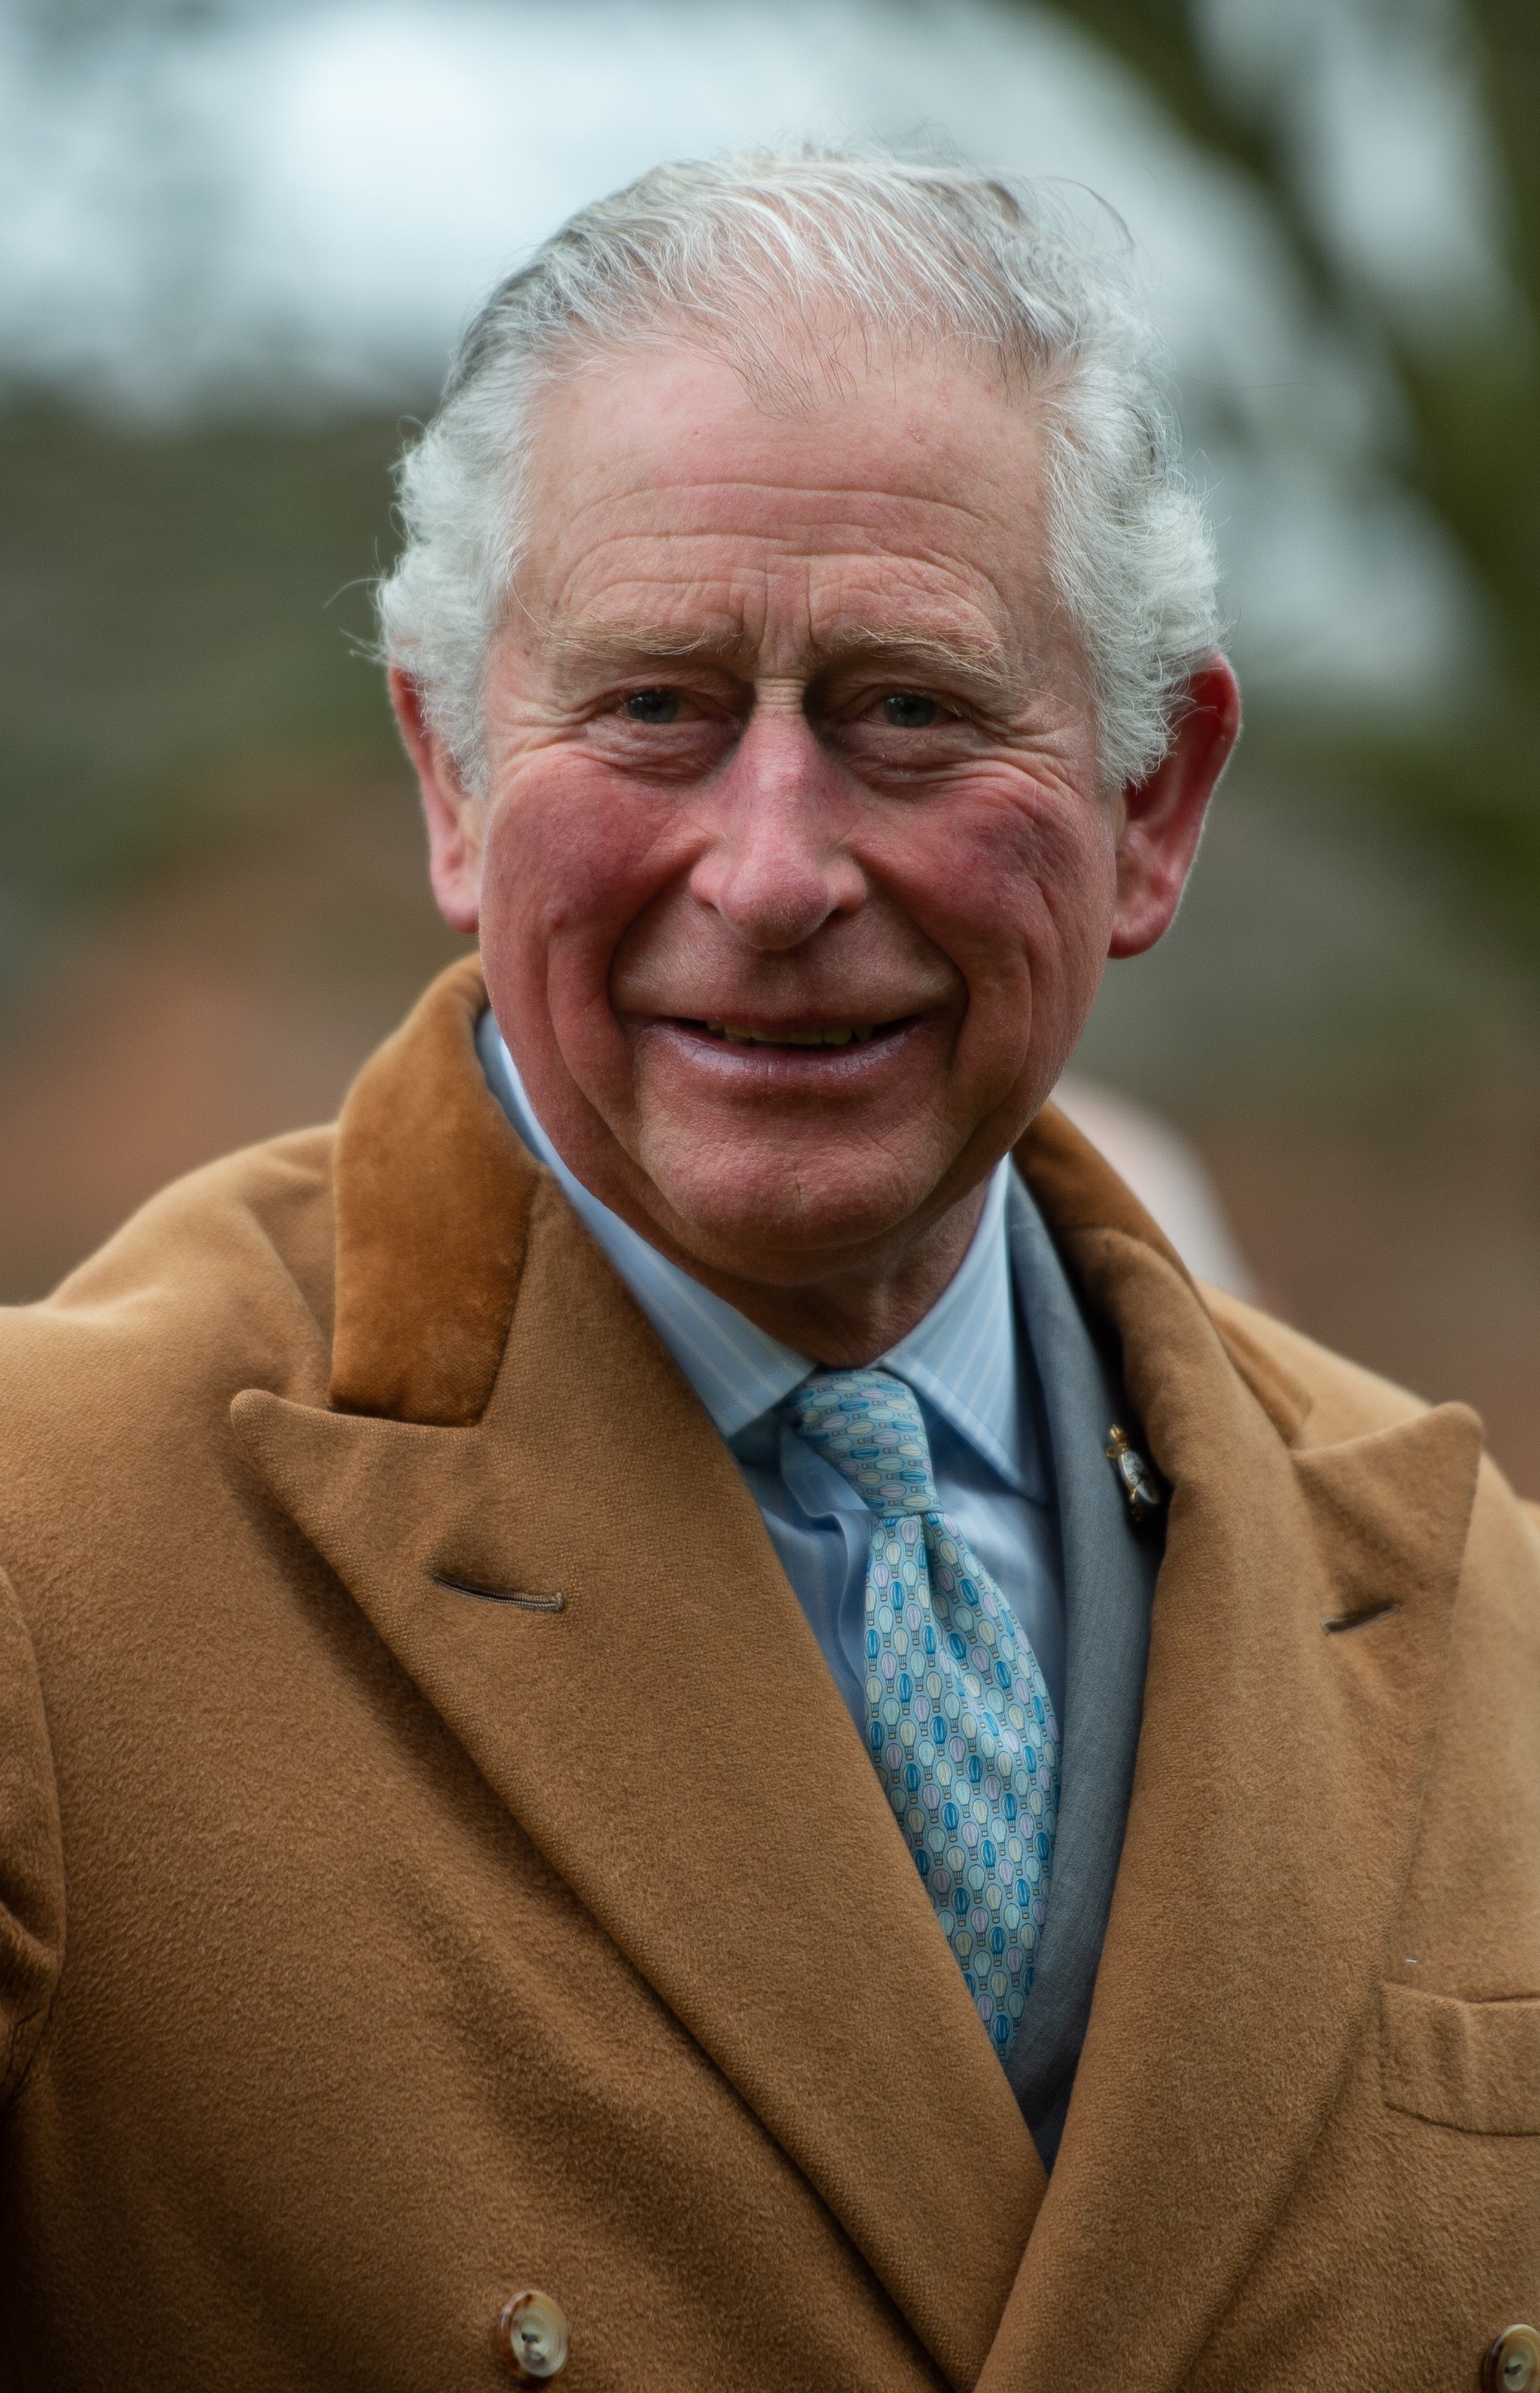 Prince Charles during a tour of Warwickshire and the West Midlands in February 2020. | Source: Getty Images.